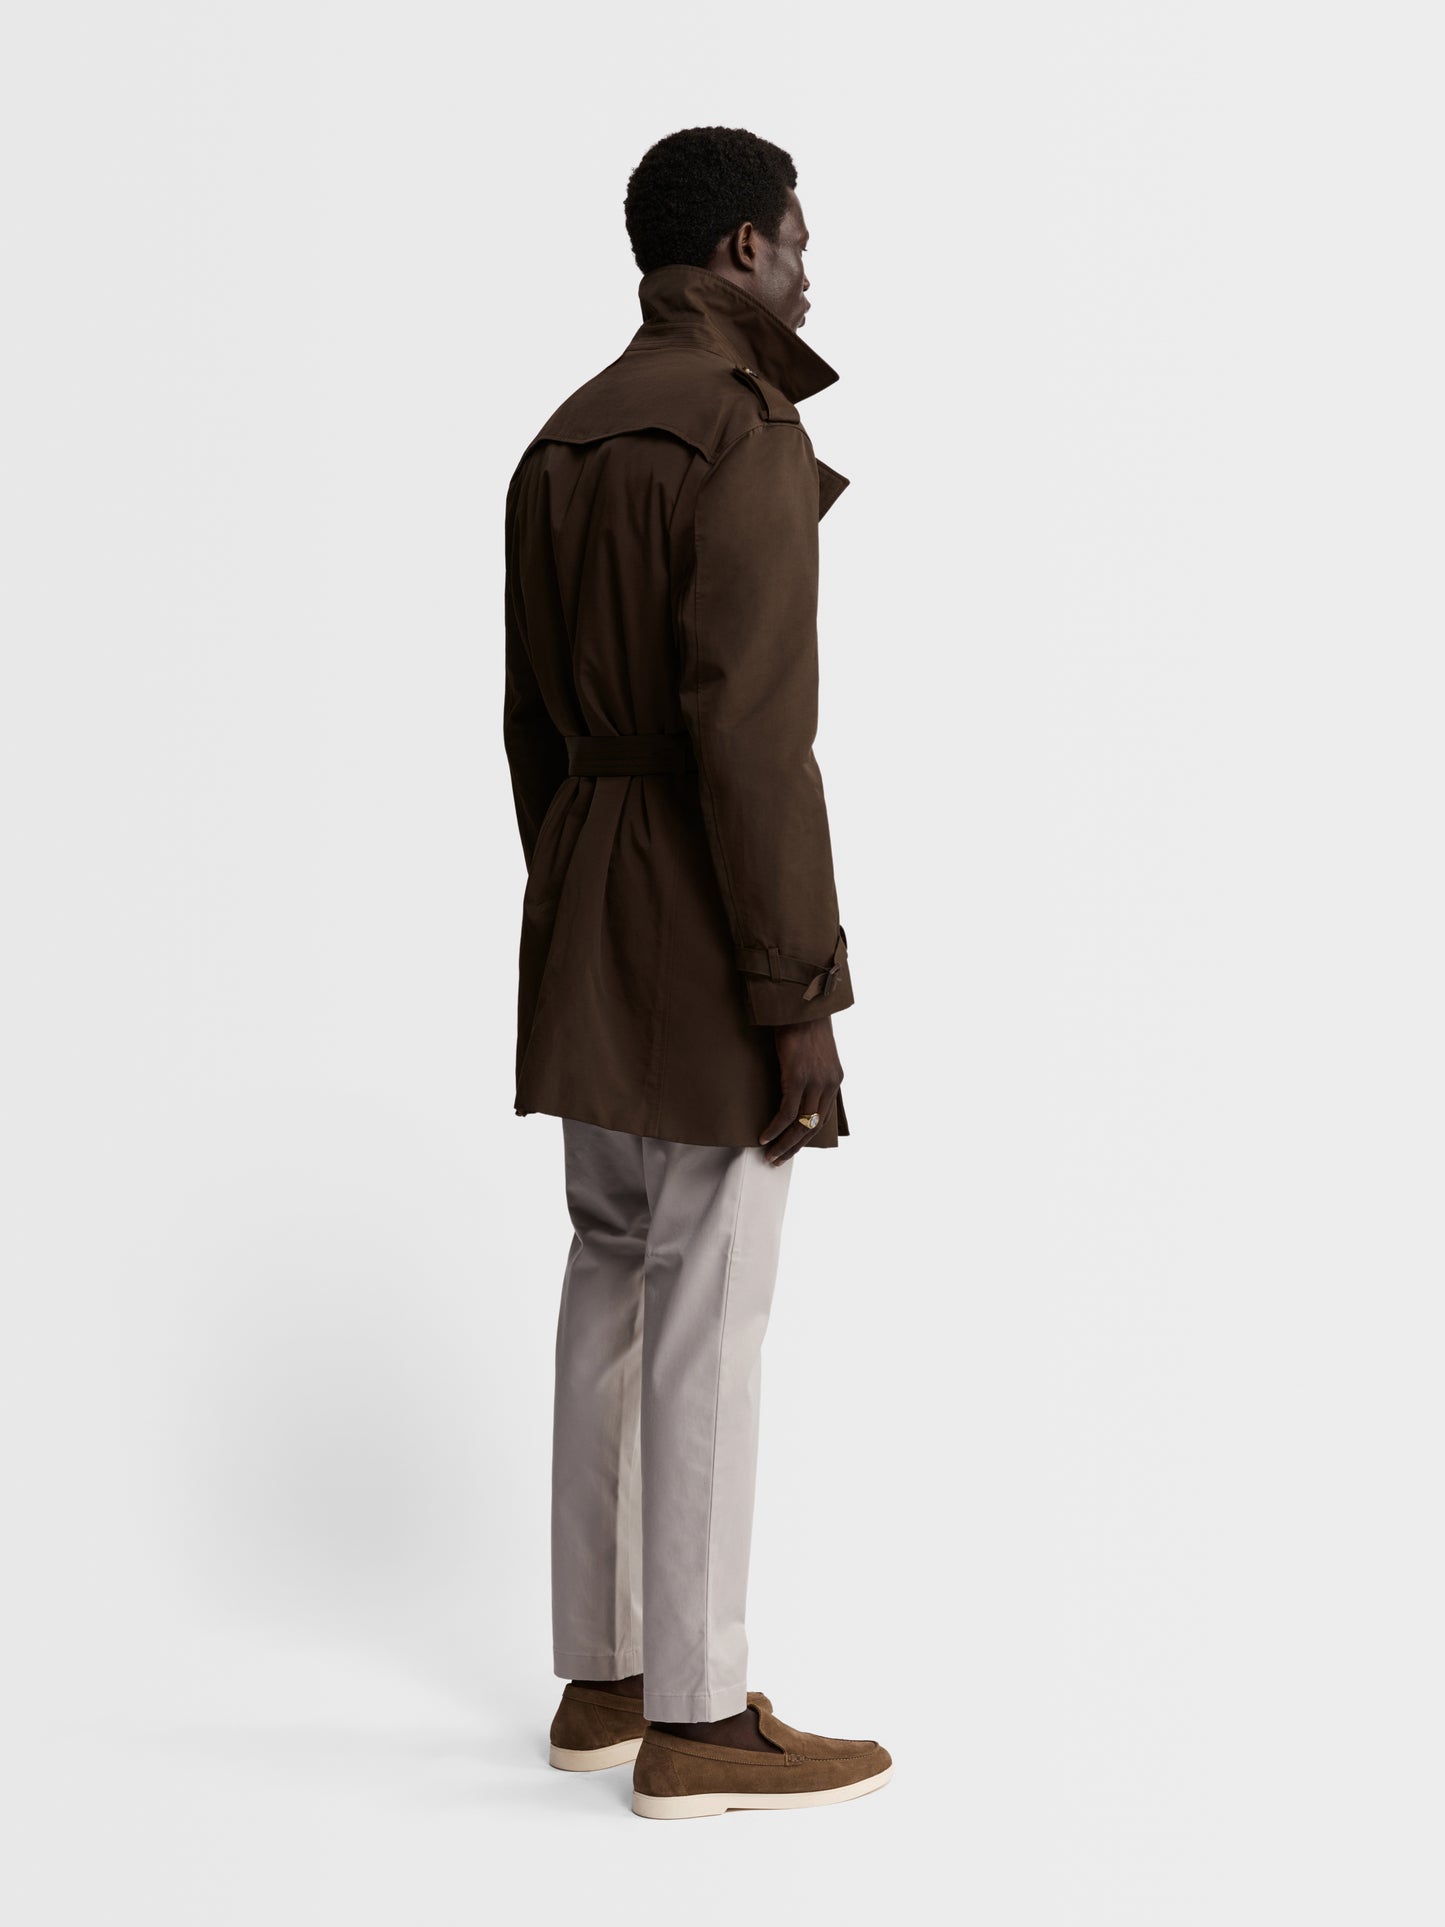 Image 6 of Spencer Slim Fit Trench Coat in Olive Showerproof Fabric